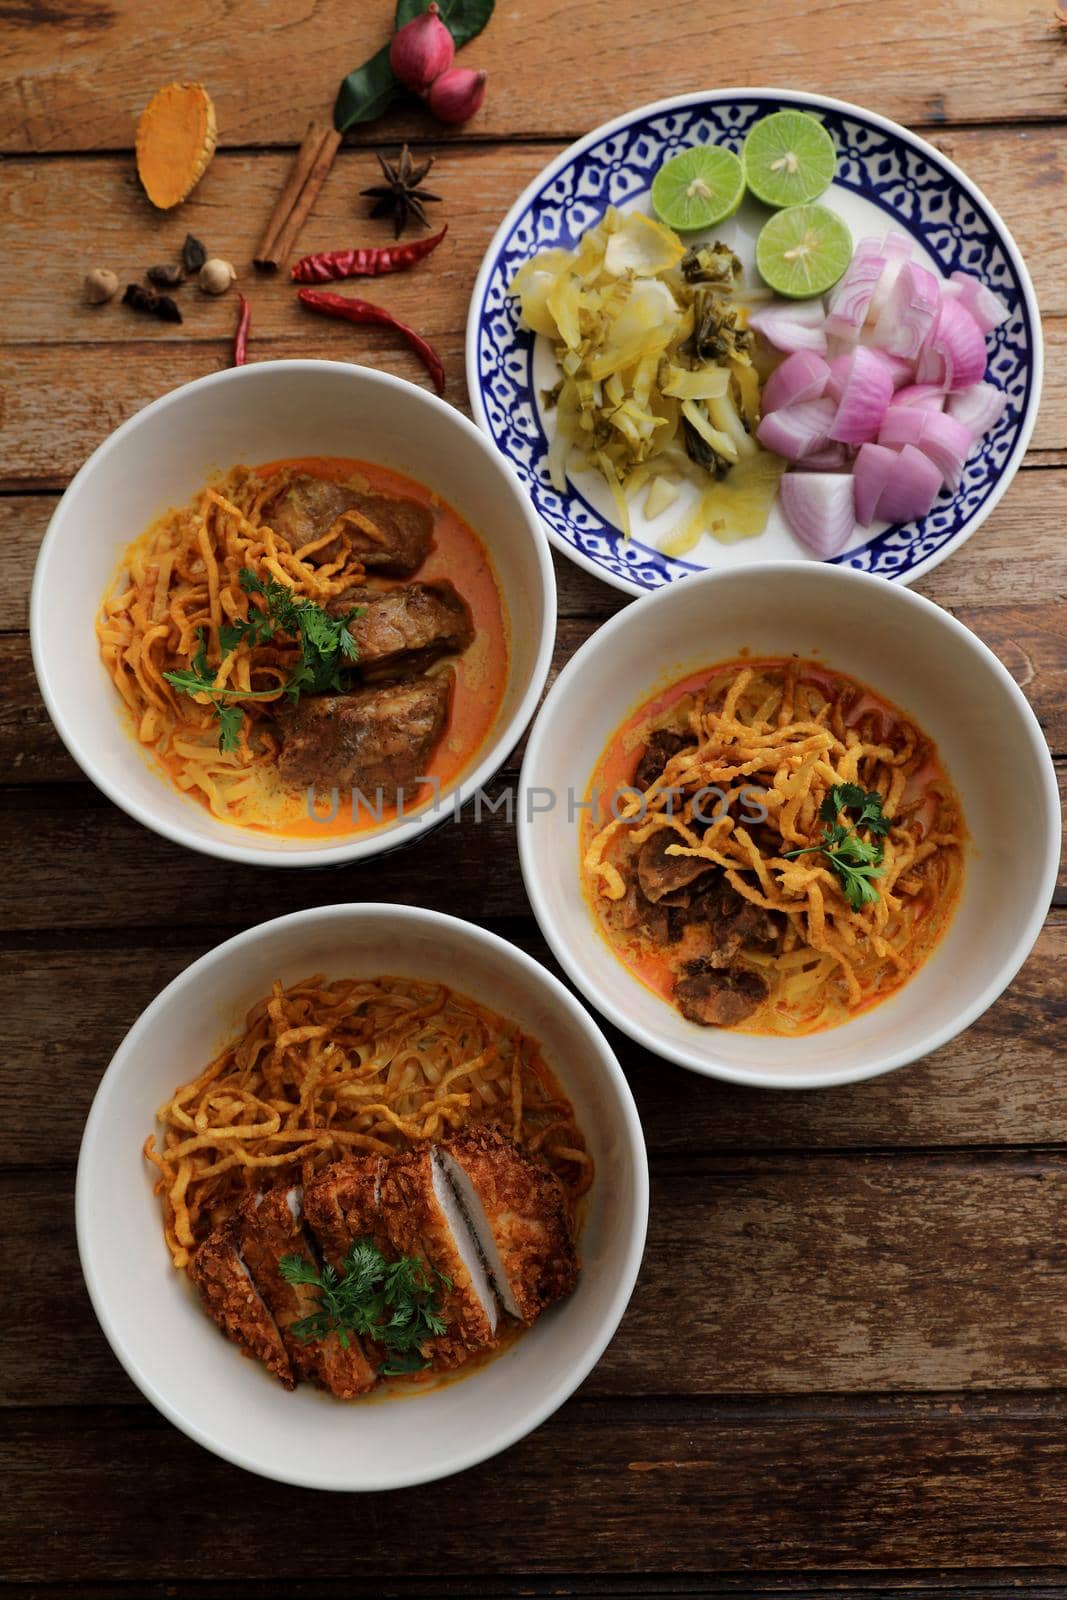 Local northern Thai food Egg noodle curry with pork and beef on wood background by piyato